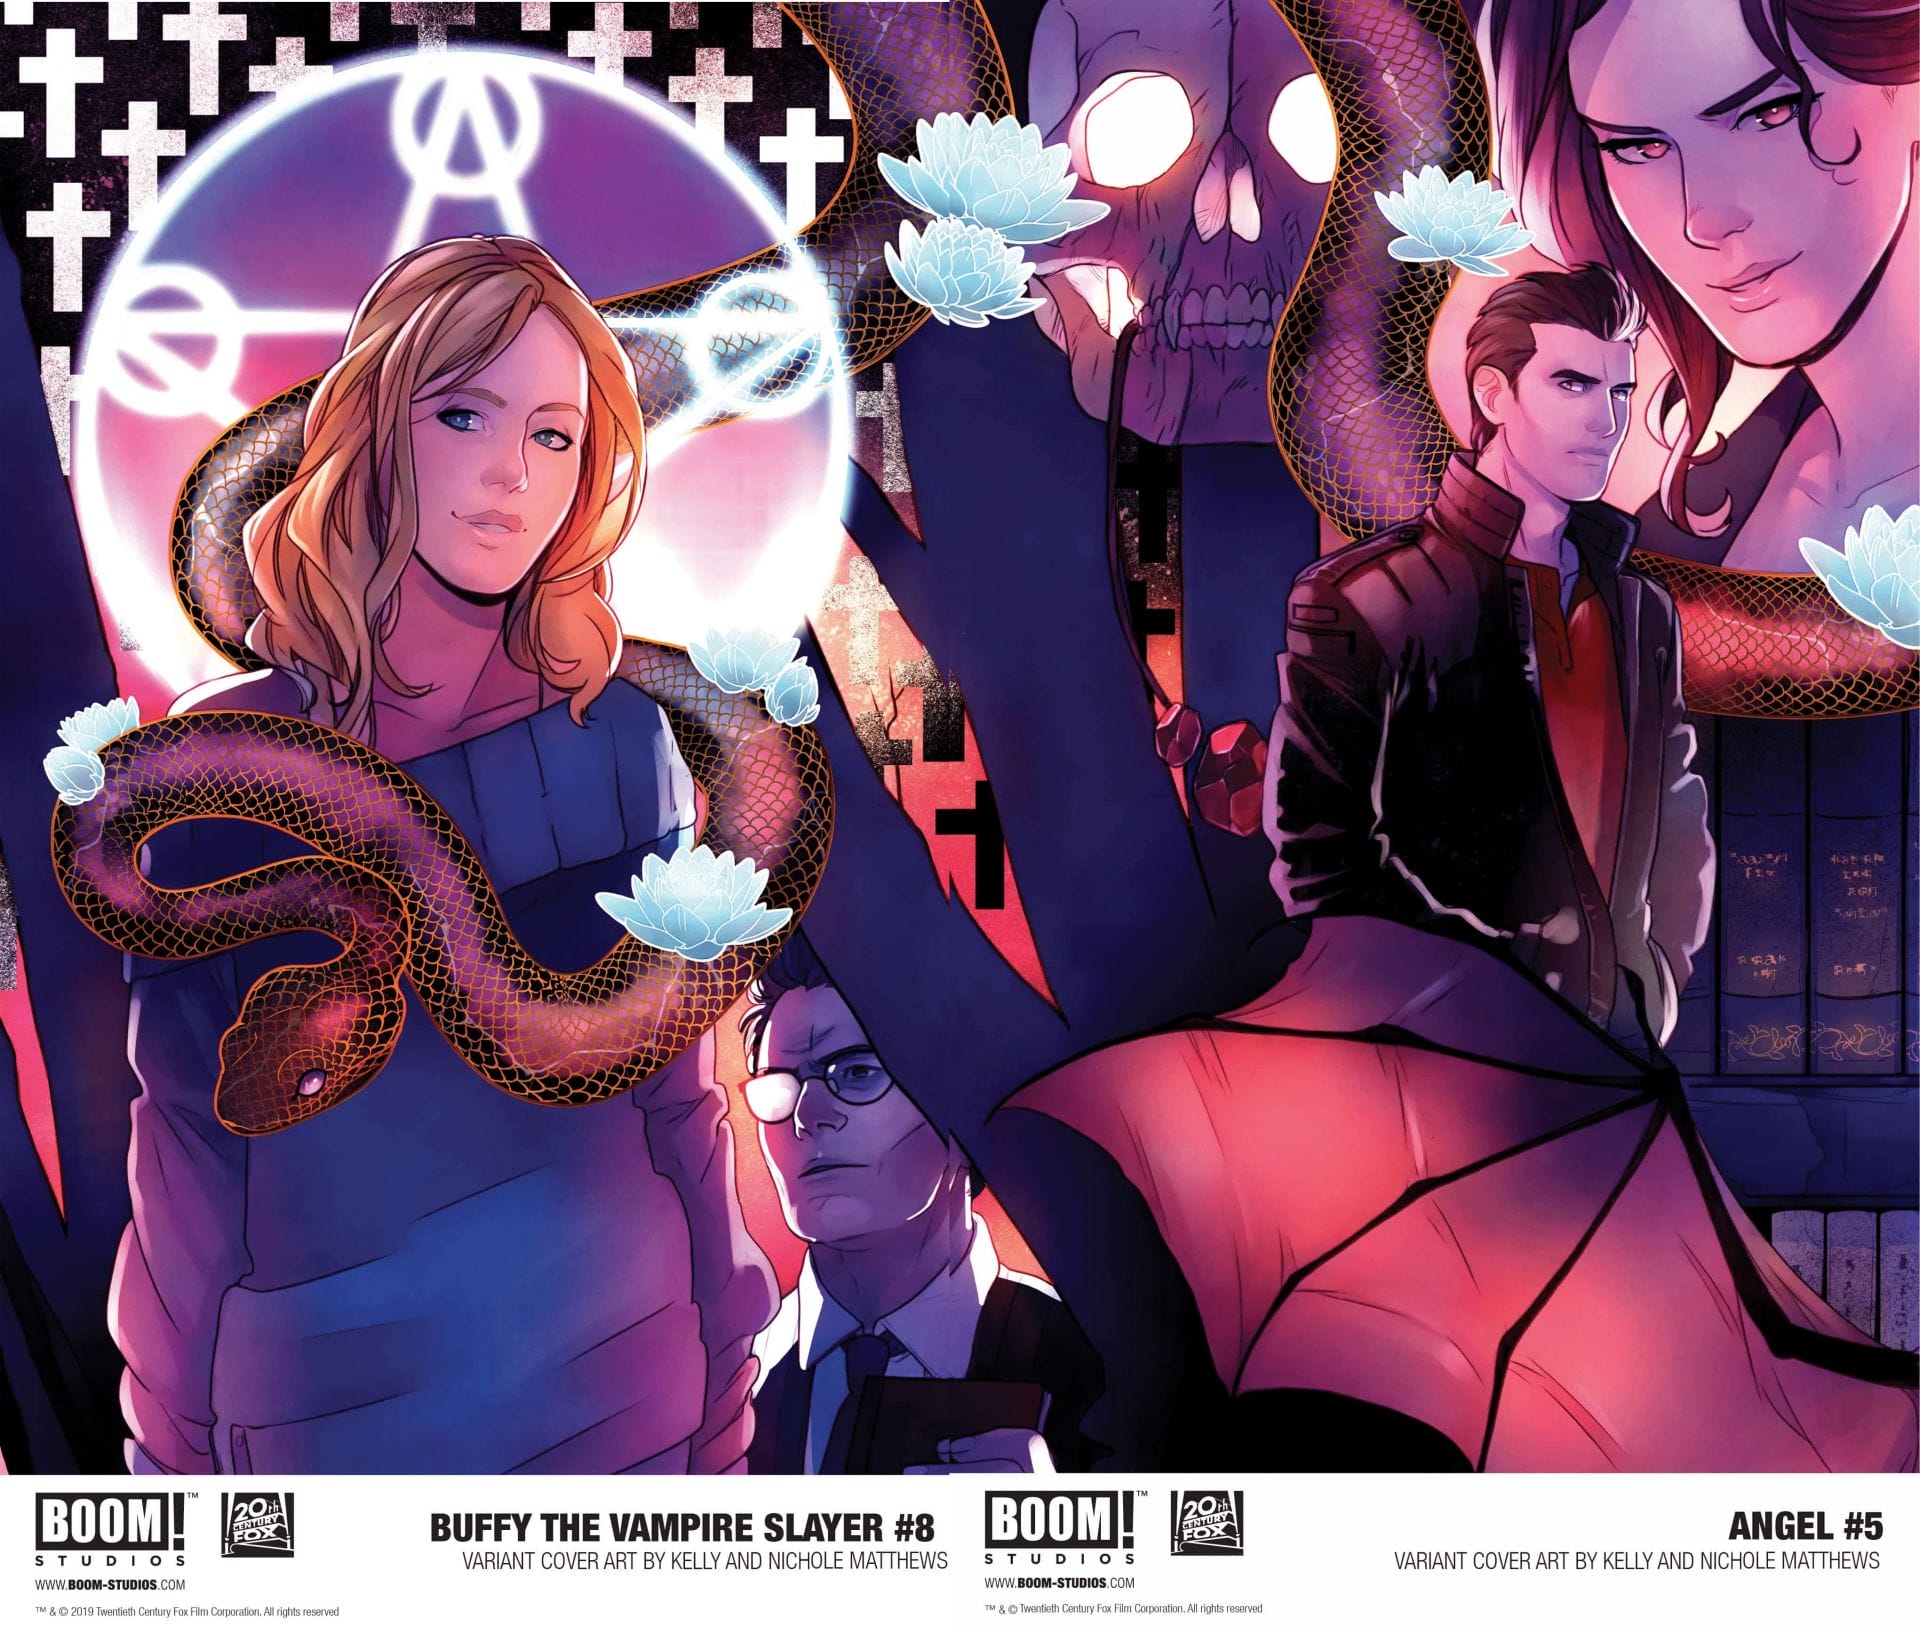 Side-by-side covers: Buffy #8 and Angel #5